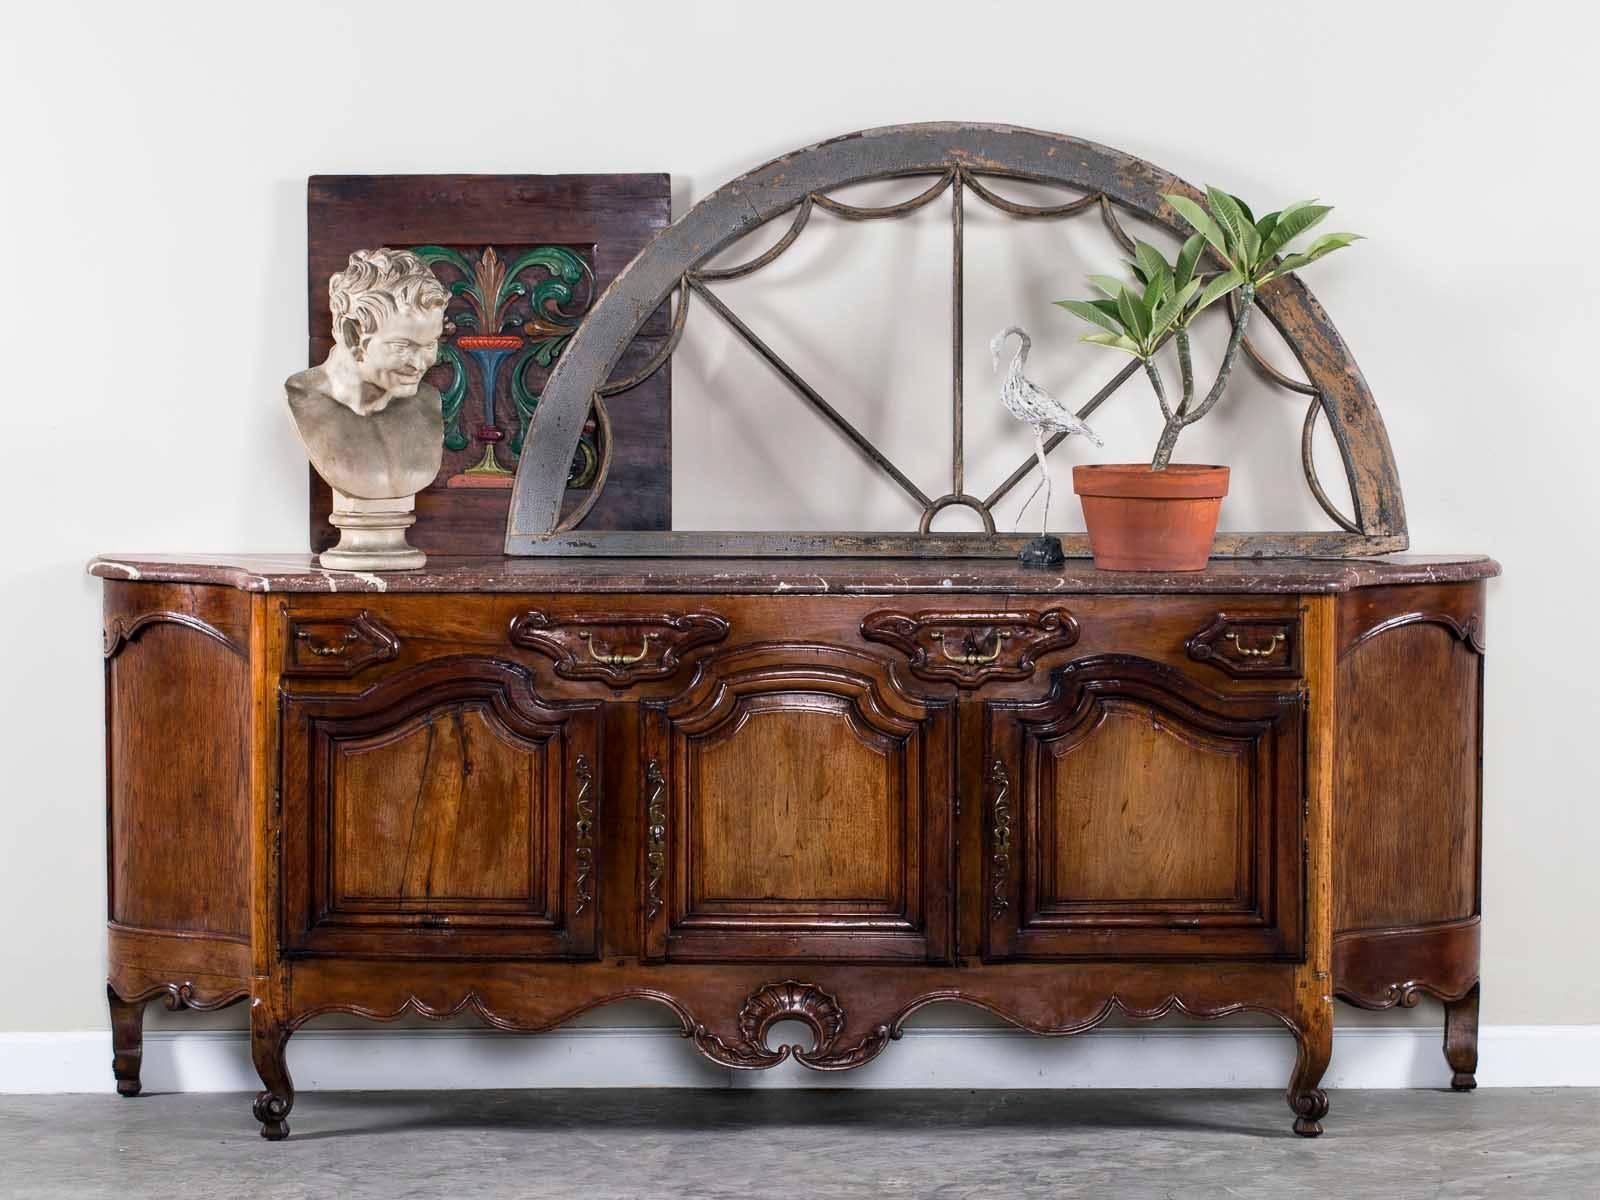 The sheer design exuberance seen on this antique French Louis XV walnut buffet credenza with its original marble top from France, circa 1780 is delightful. Of course this buffet was meant to function for both display, serving and storage but the